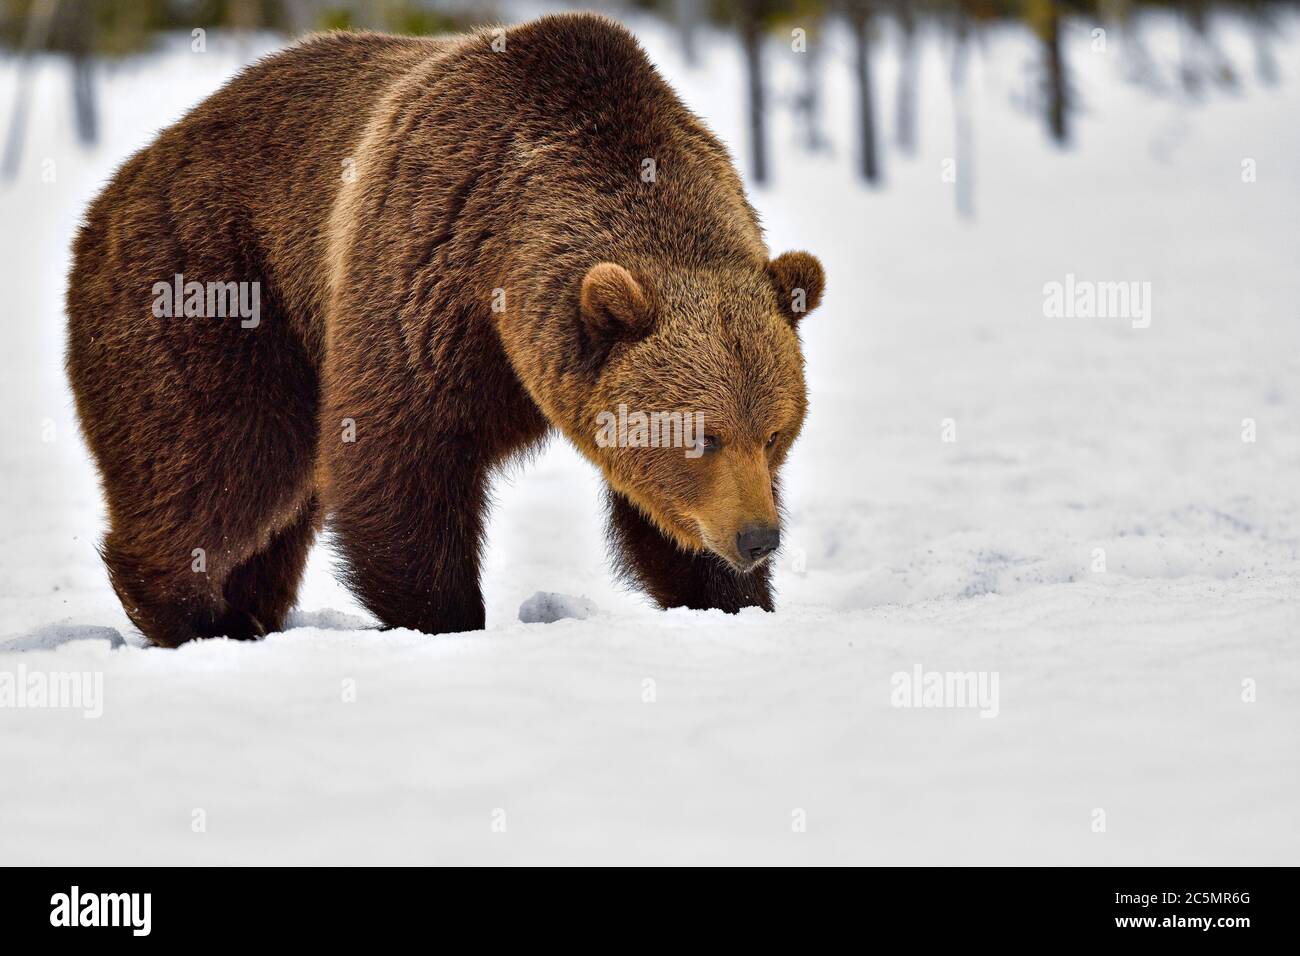 Brown bear. Those eyes are showing pure determination and power. Stock Photo